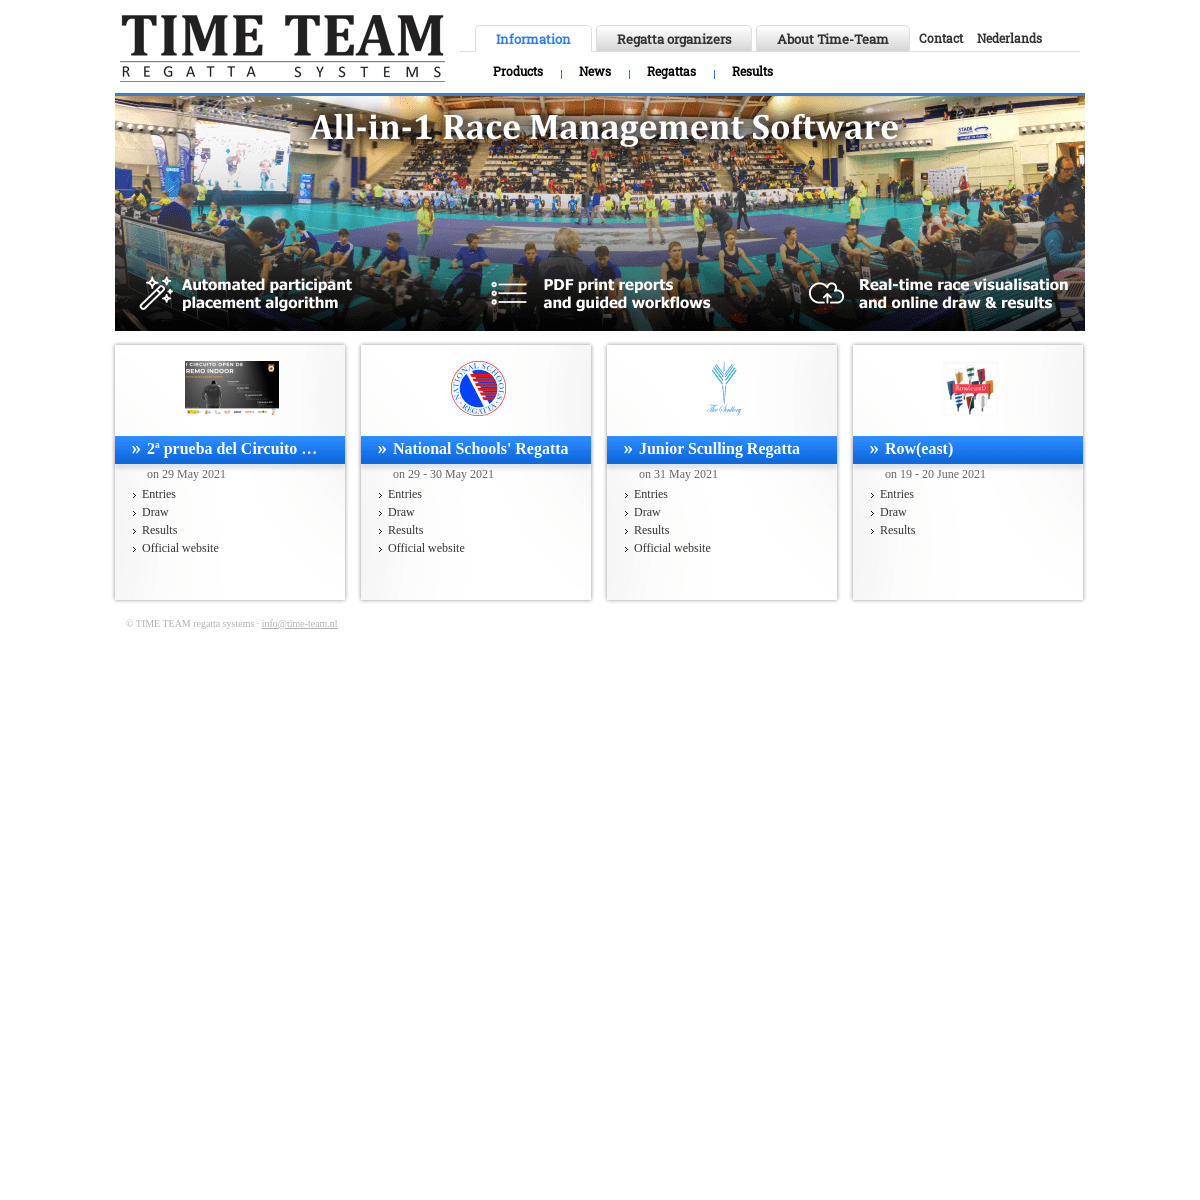 A complete backup of https://time-team.nl